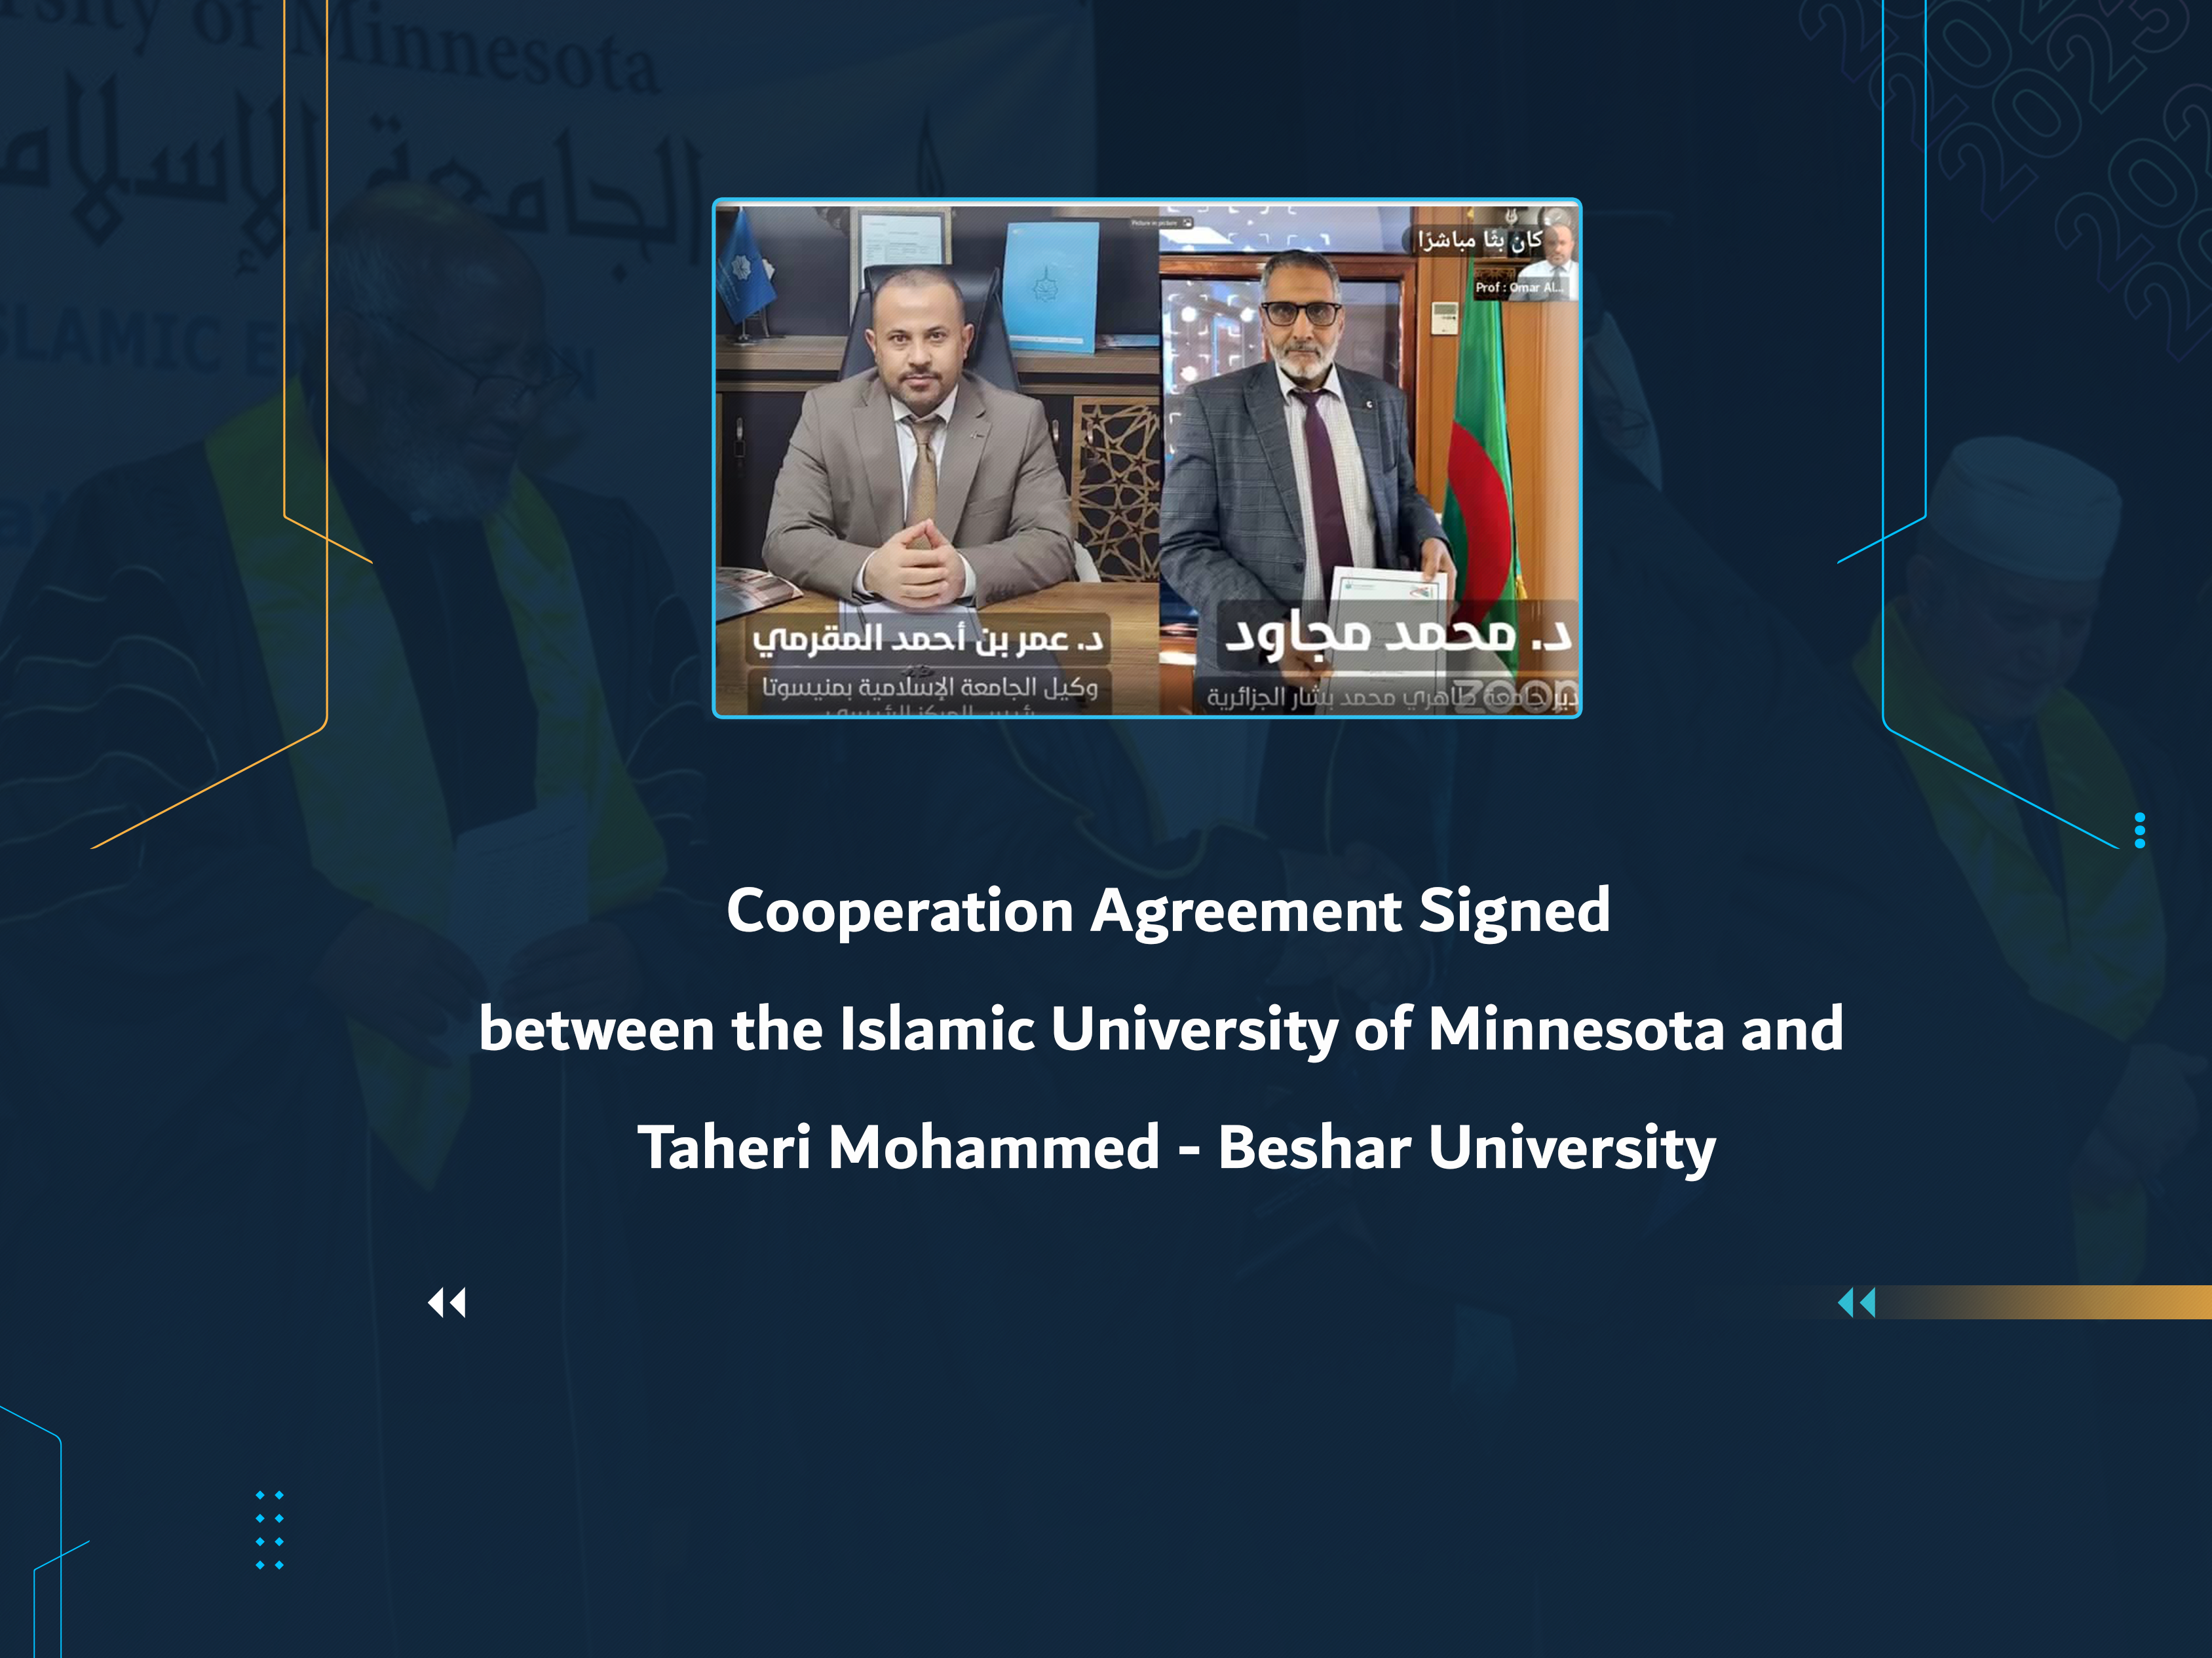 Cooperation Agreement Signed between the Islamic University of Minnesota and Taheri Mohammed - Beshar University